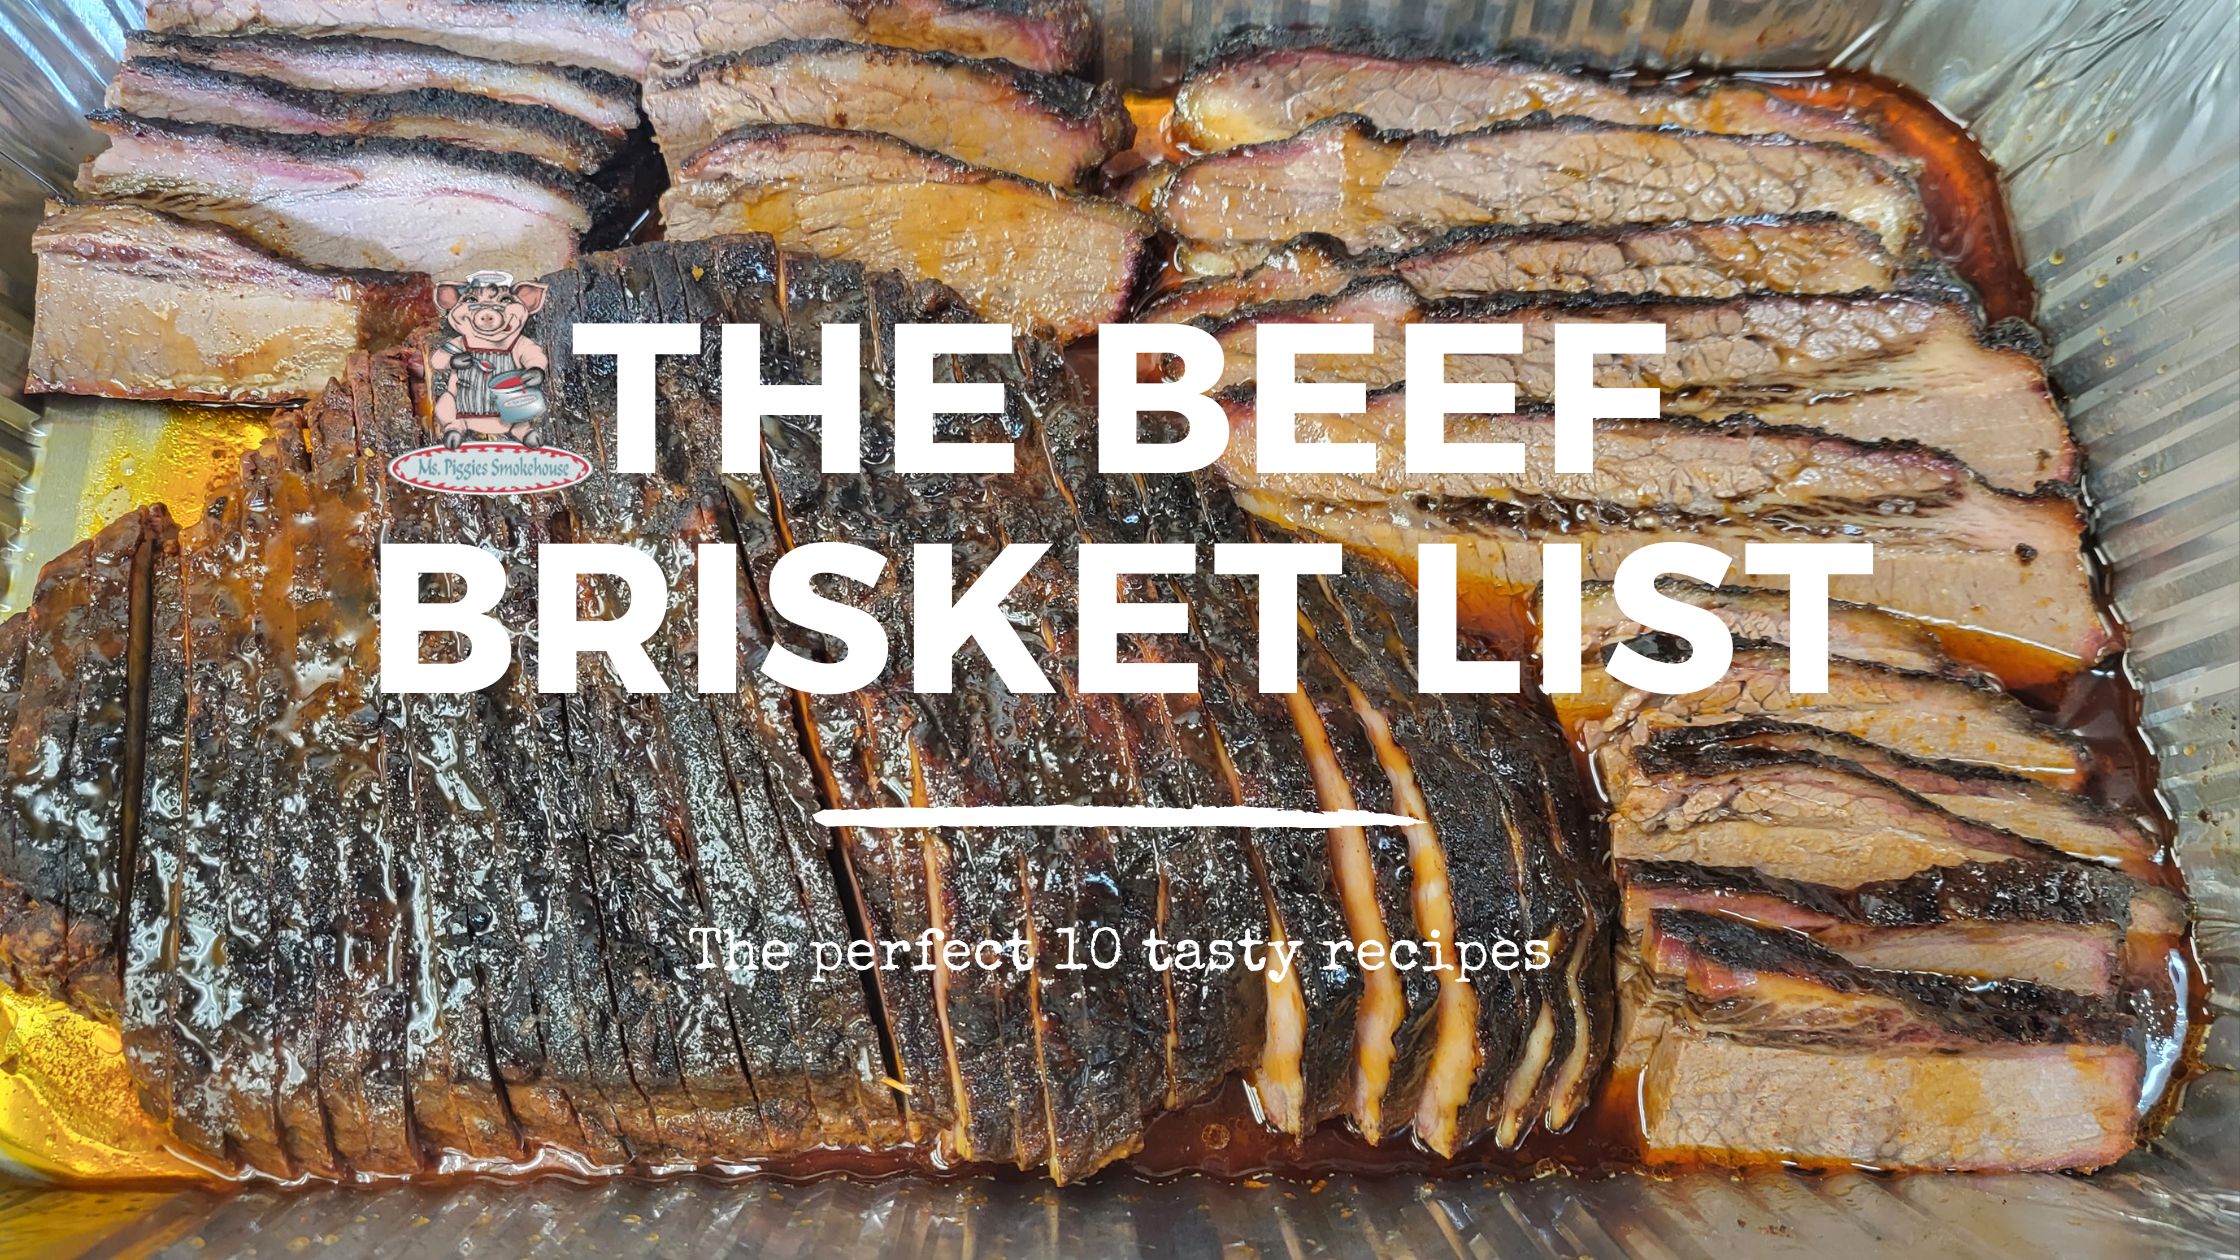 You are currently viewing 10 Beef Brisket Bonanzas You Can’t Miss